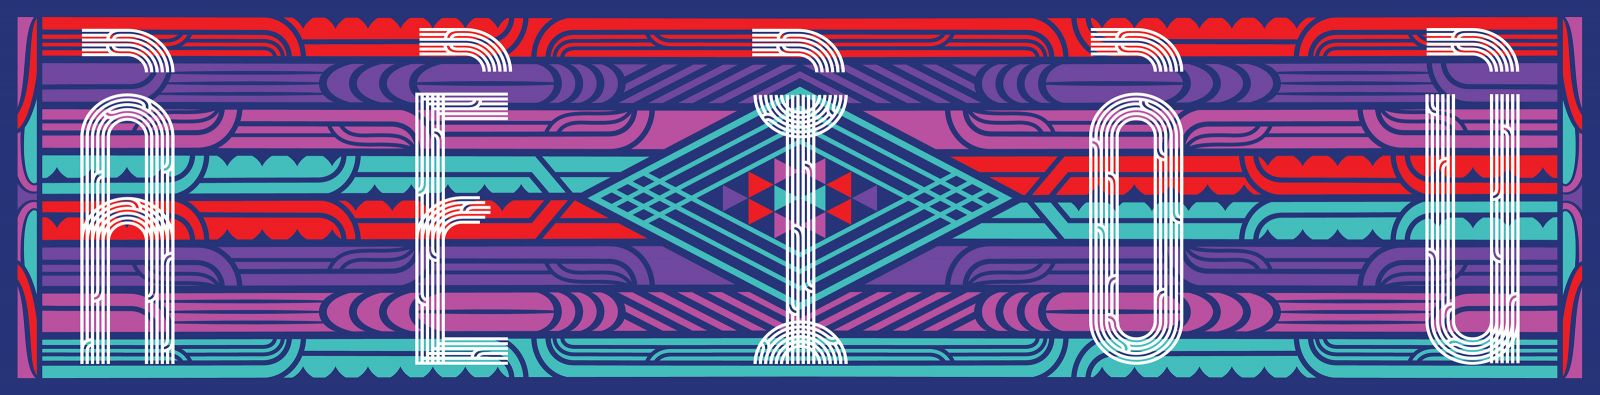 Graphic inspired by a whakairo patterns in purples, reds, and teals with ā, ē, ī, ō, ū in white overtop.